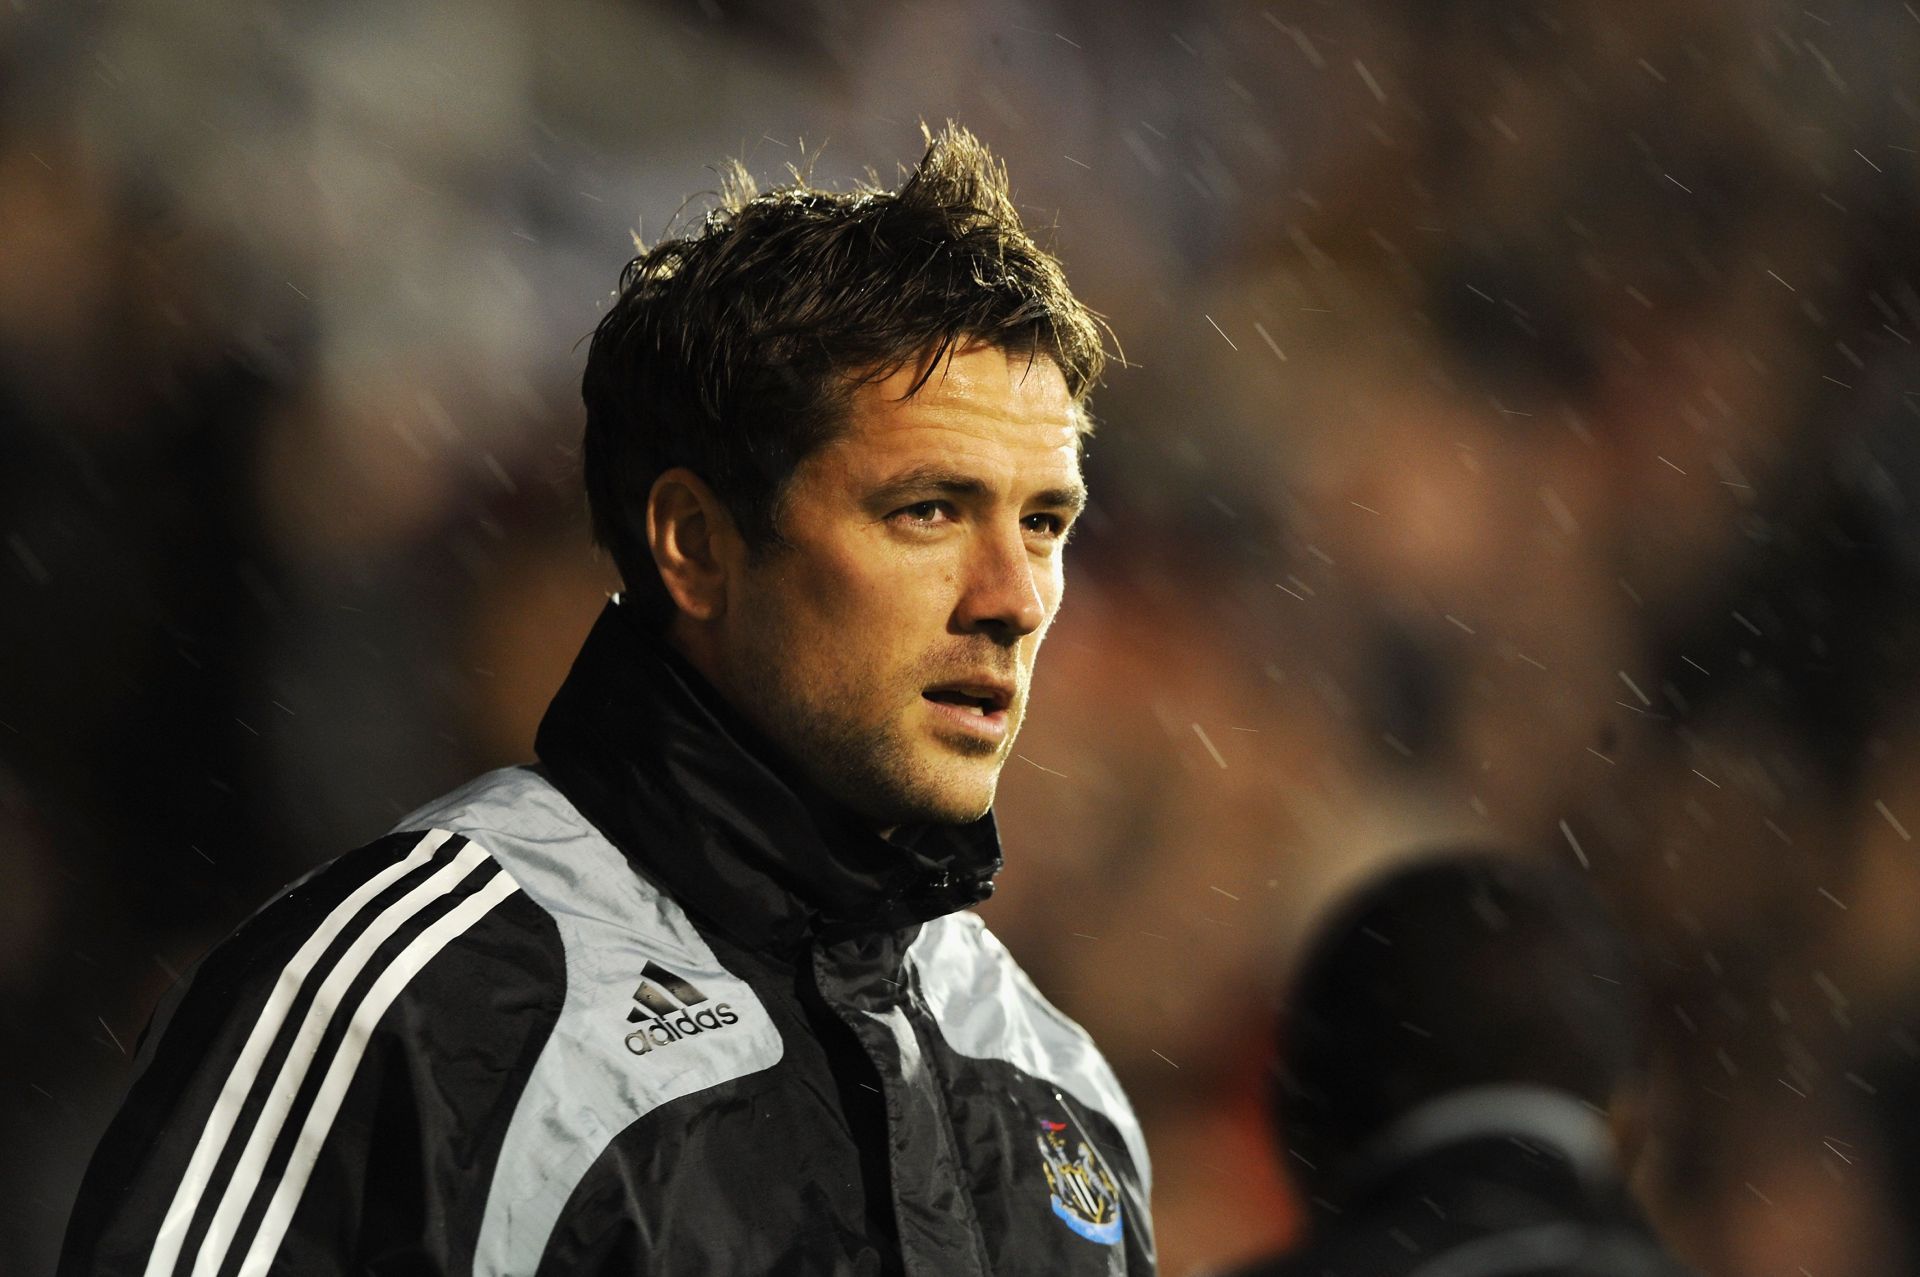 Michael Owen had a difficult time with the Newcastle faithful